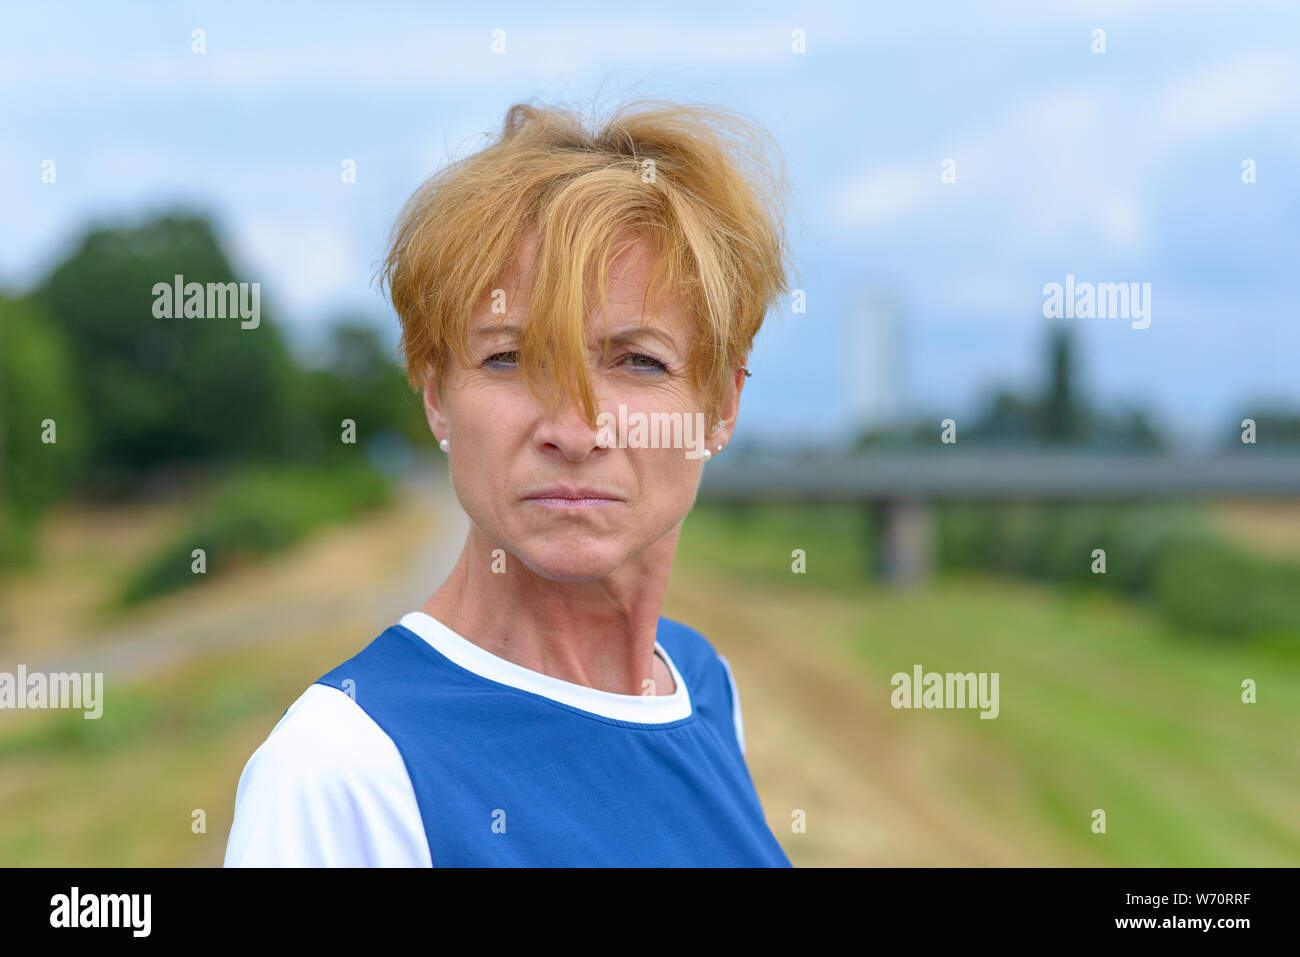 Upset angry woman glaring at the camera with an intense expression with her red blond hair falling over her nose outdoors in countryside Stock Photo